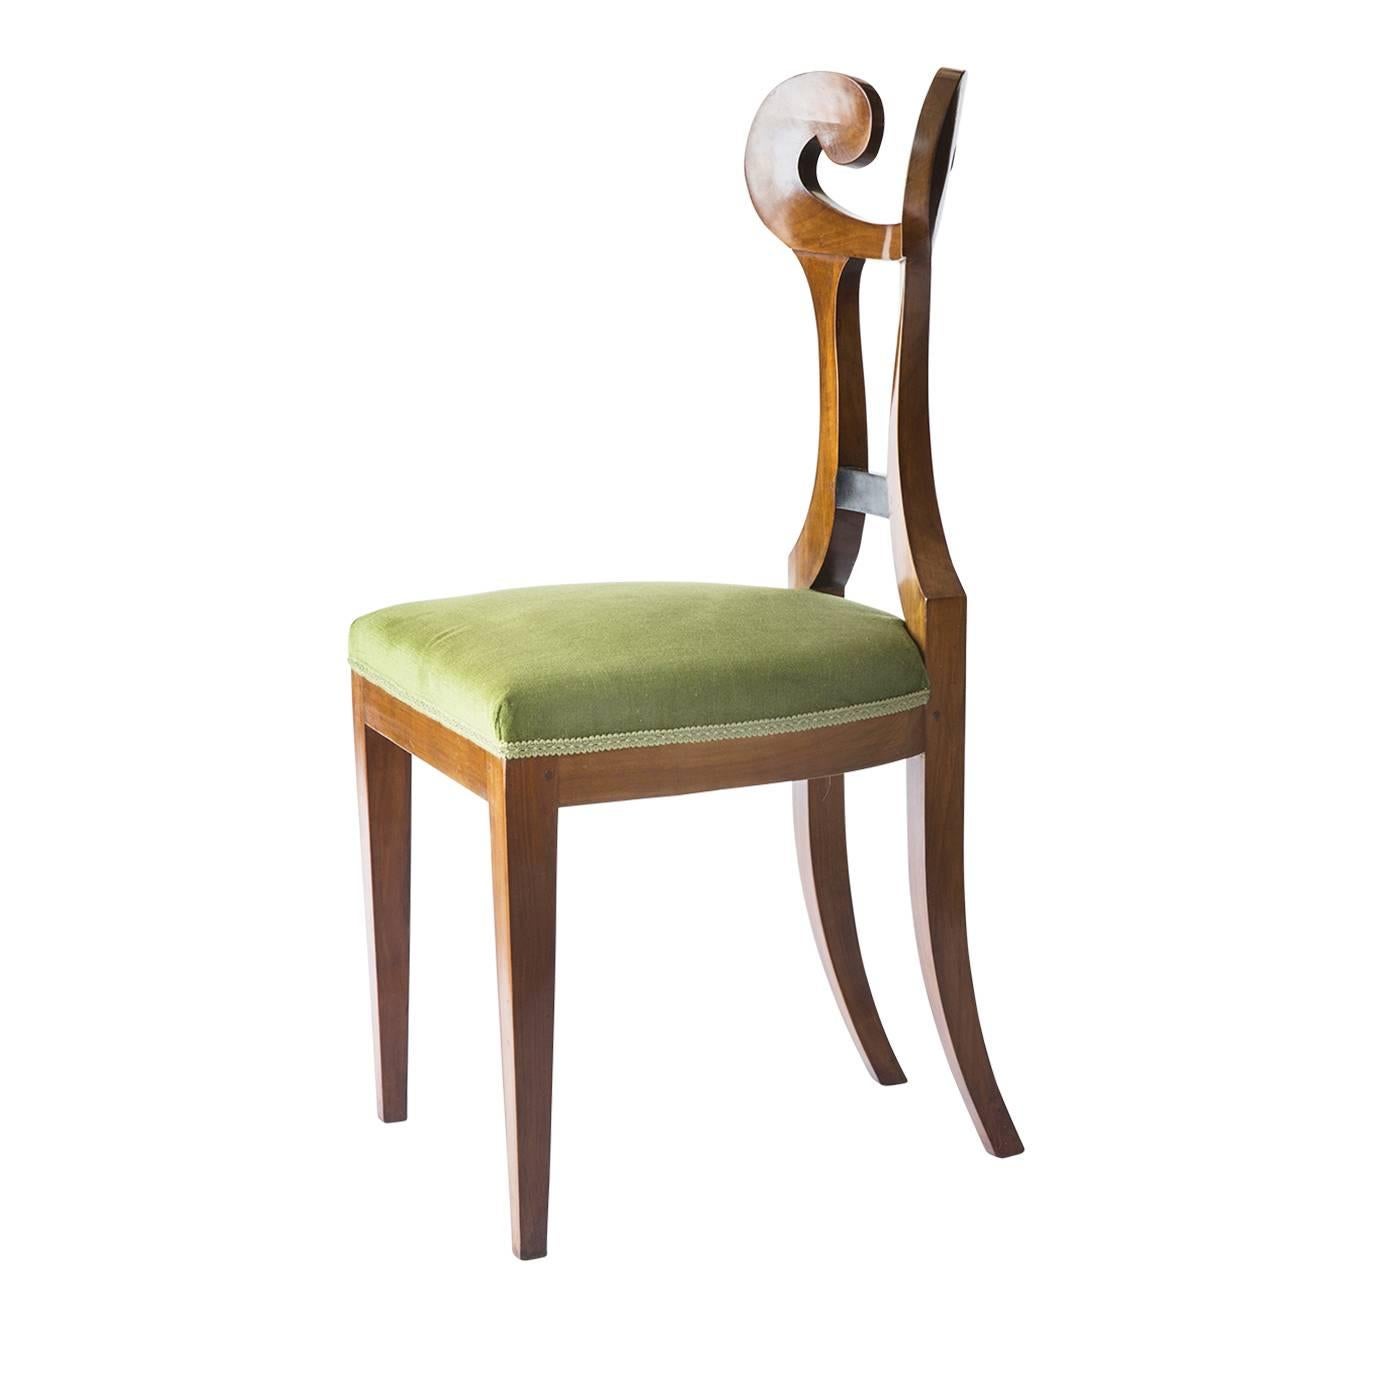 Wonderful set of four Biedermeier style seats made in solid cheerywood and finished with a veneering in the same wood and light green velvet for the seat. Each chair is fitted with trimmed finishes and a handmade polished shellac. The foam rubber